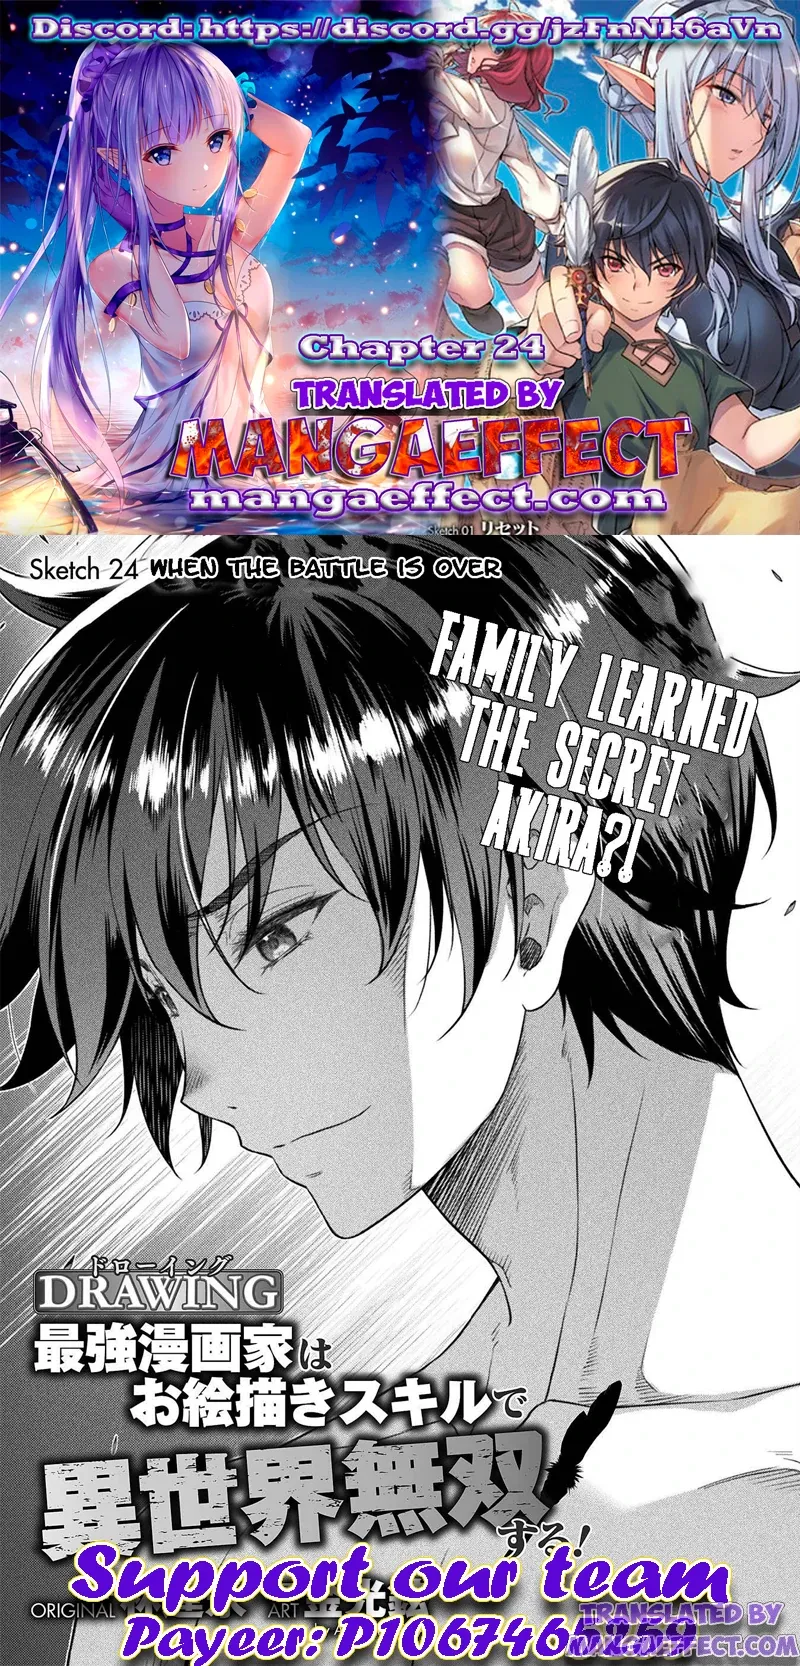 Drawing: The Greatest Mangaka Becomes A Skilled “Martial Artist” In Another World Chapter 24 page 1